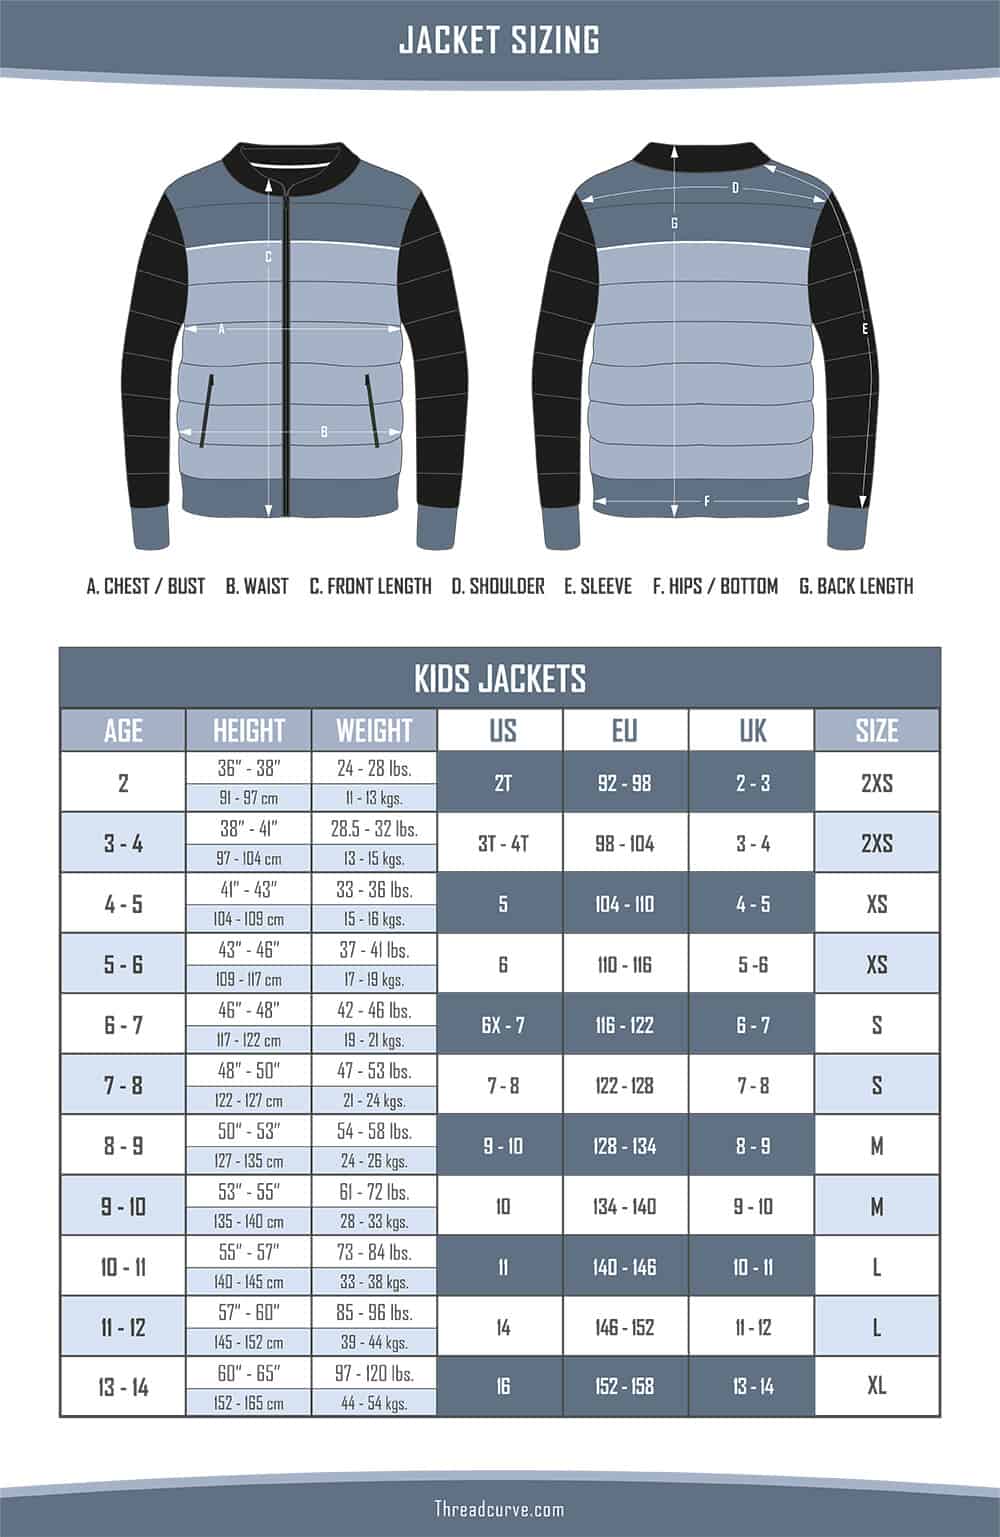 This is the chart for the Kids Jackets Sizes.